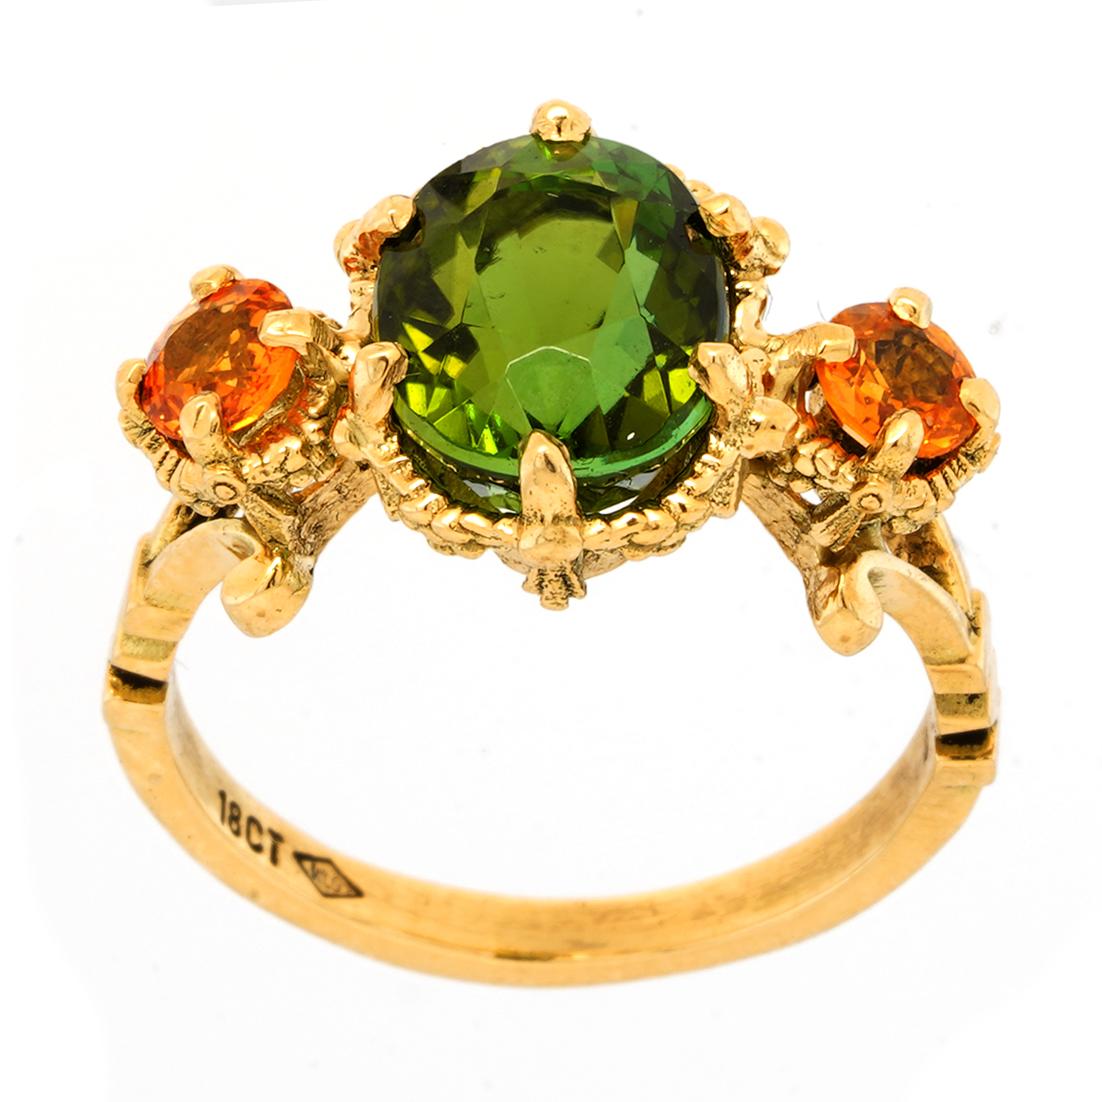 POMONA RING

Pomona was the goddess of abundance in Roman mythology. She was a wood nymph whom watched over fruit trees and orchards.

Intricately handcrafted in 18kt yellow gold this exquisite Renaissance inspired three stone ring features a